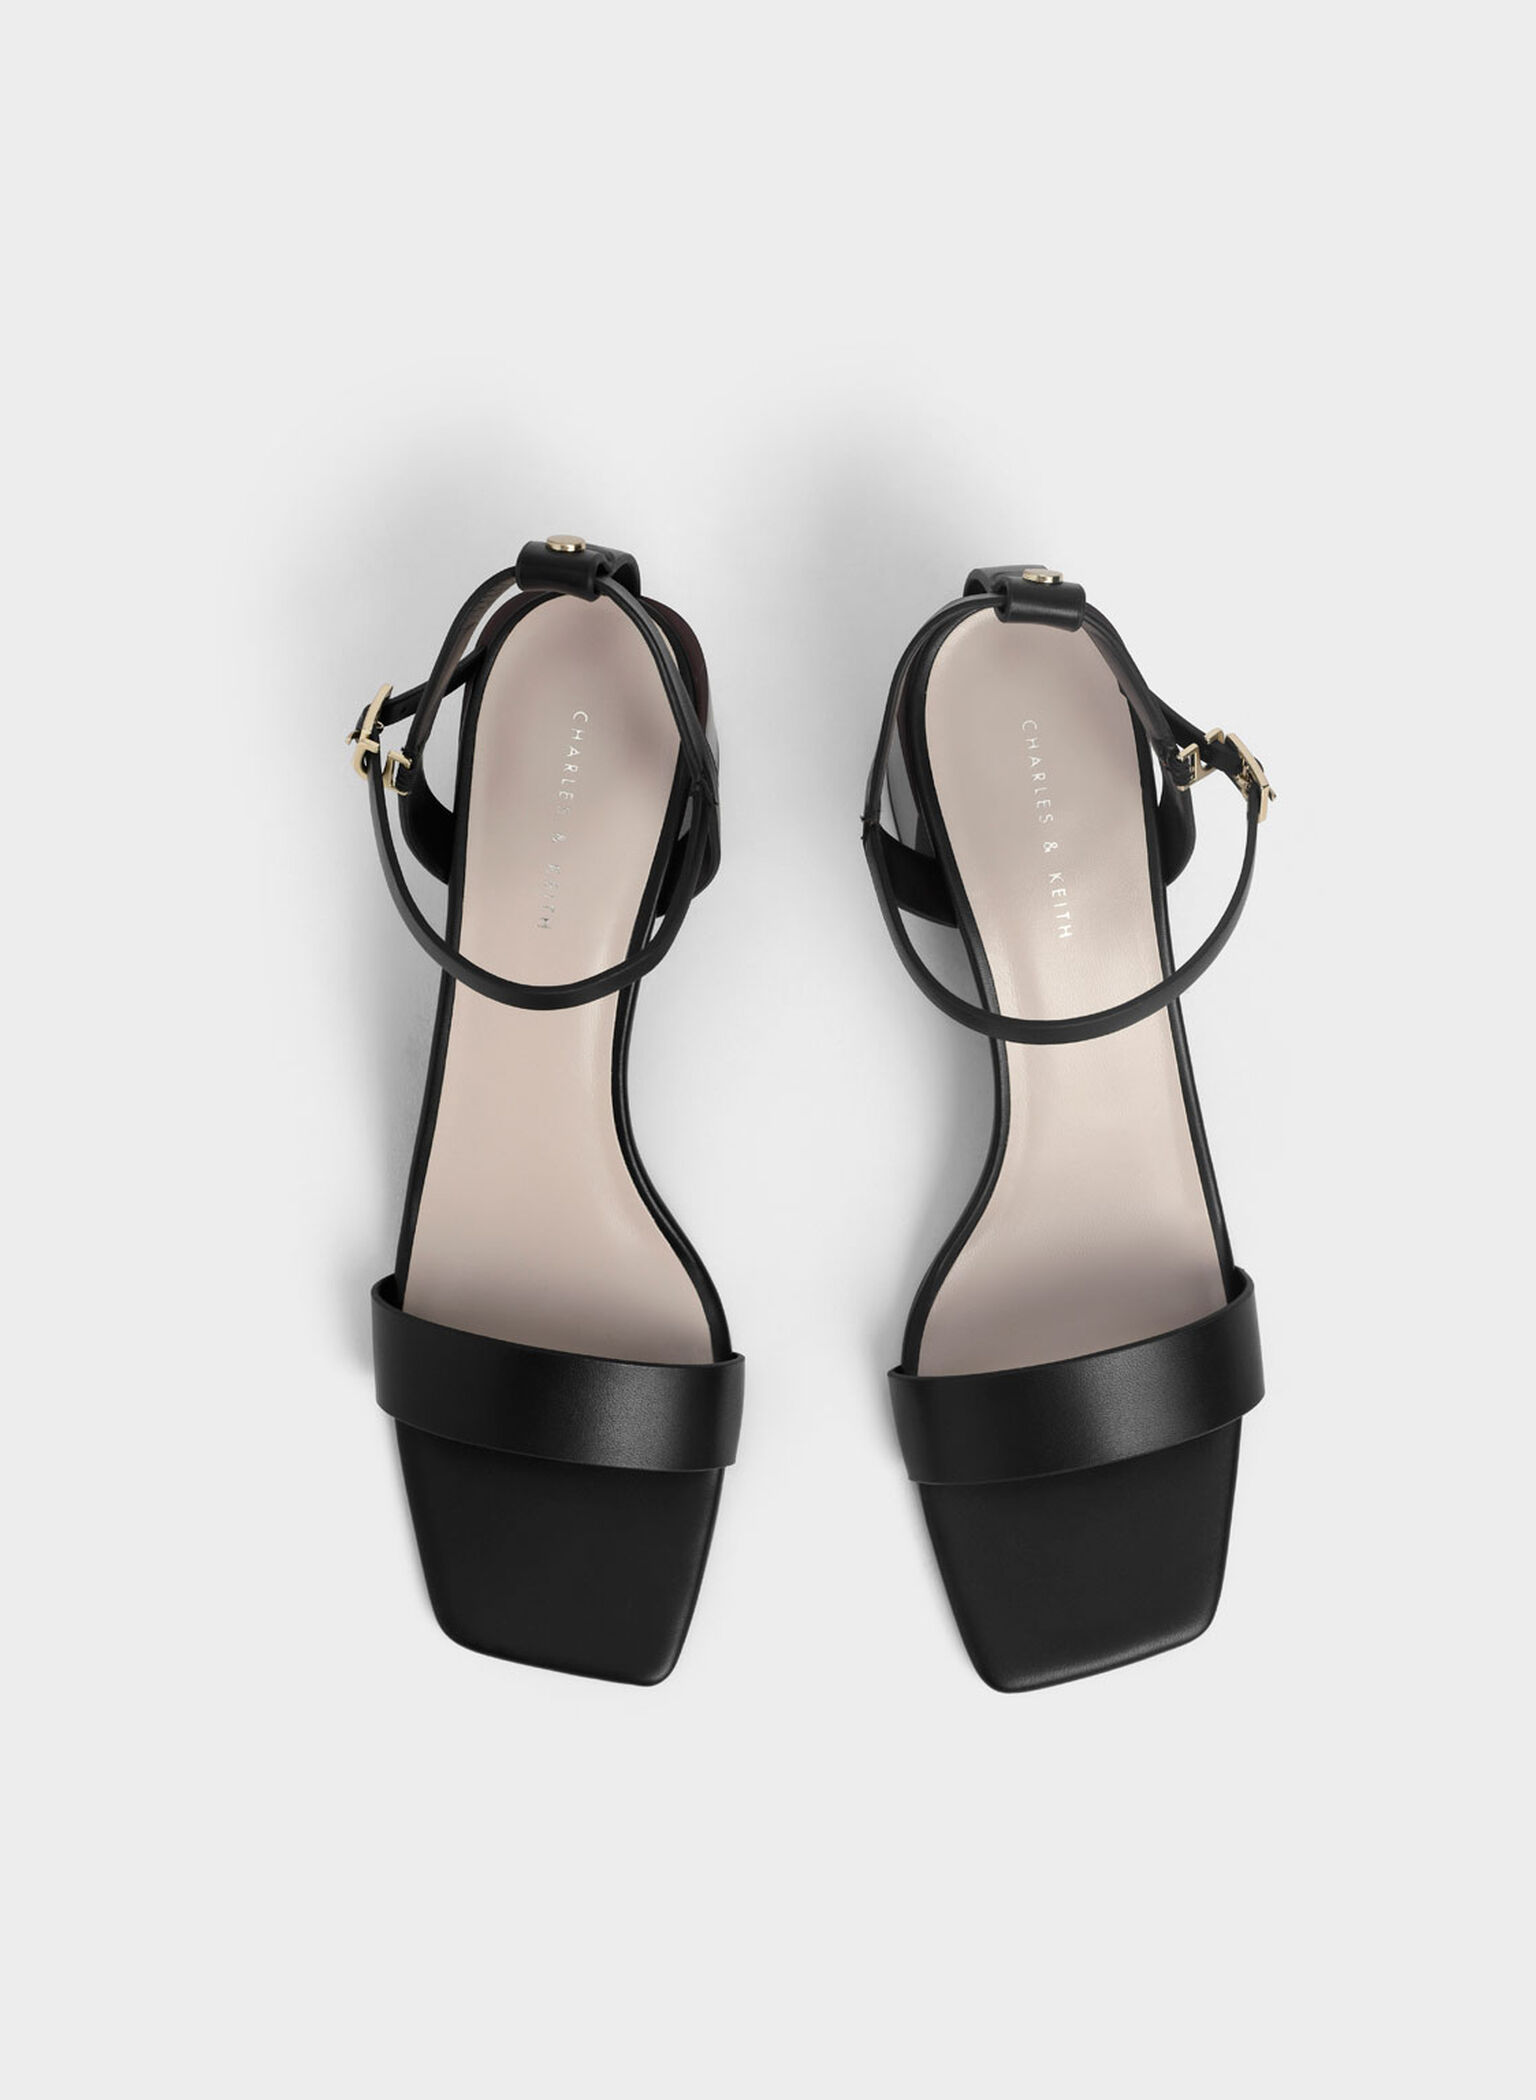 Black Ankle Strap Stacked Heel Sandals - CHARLES & KEITH US